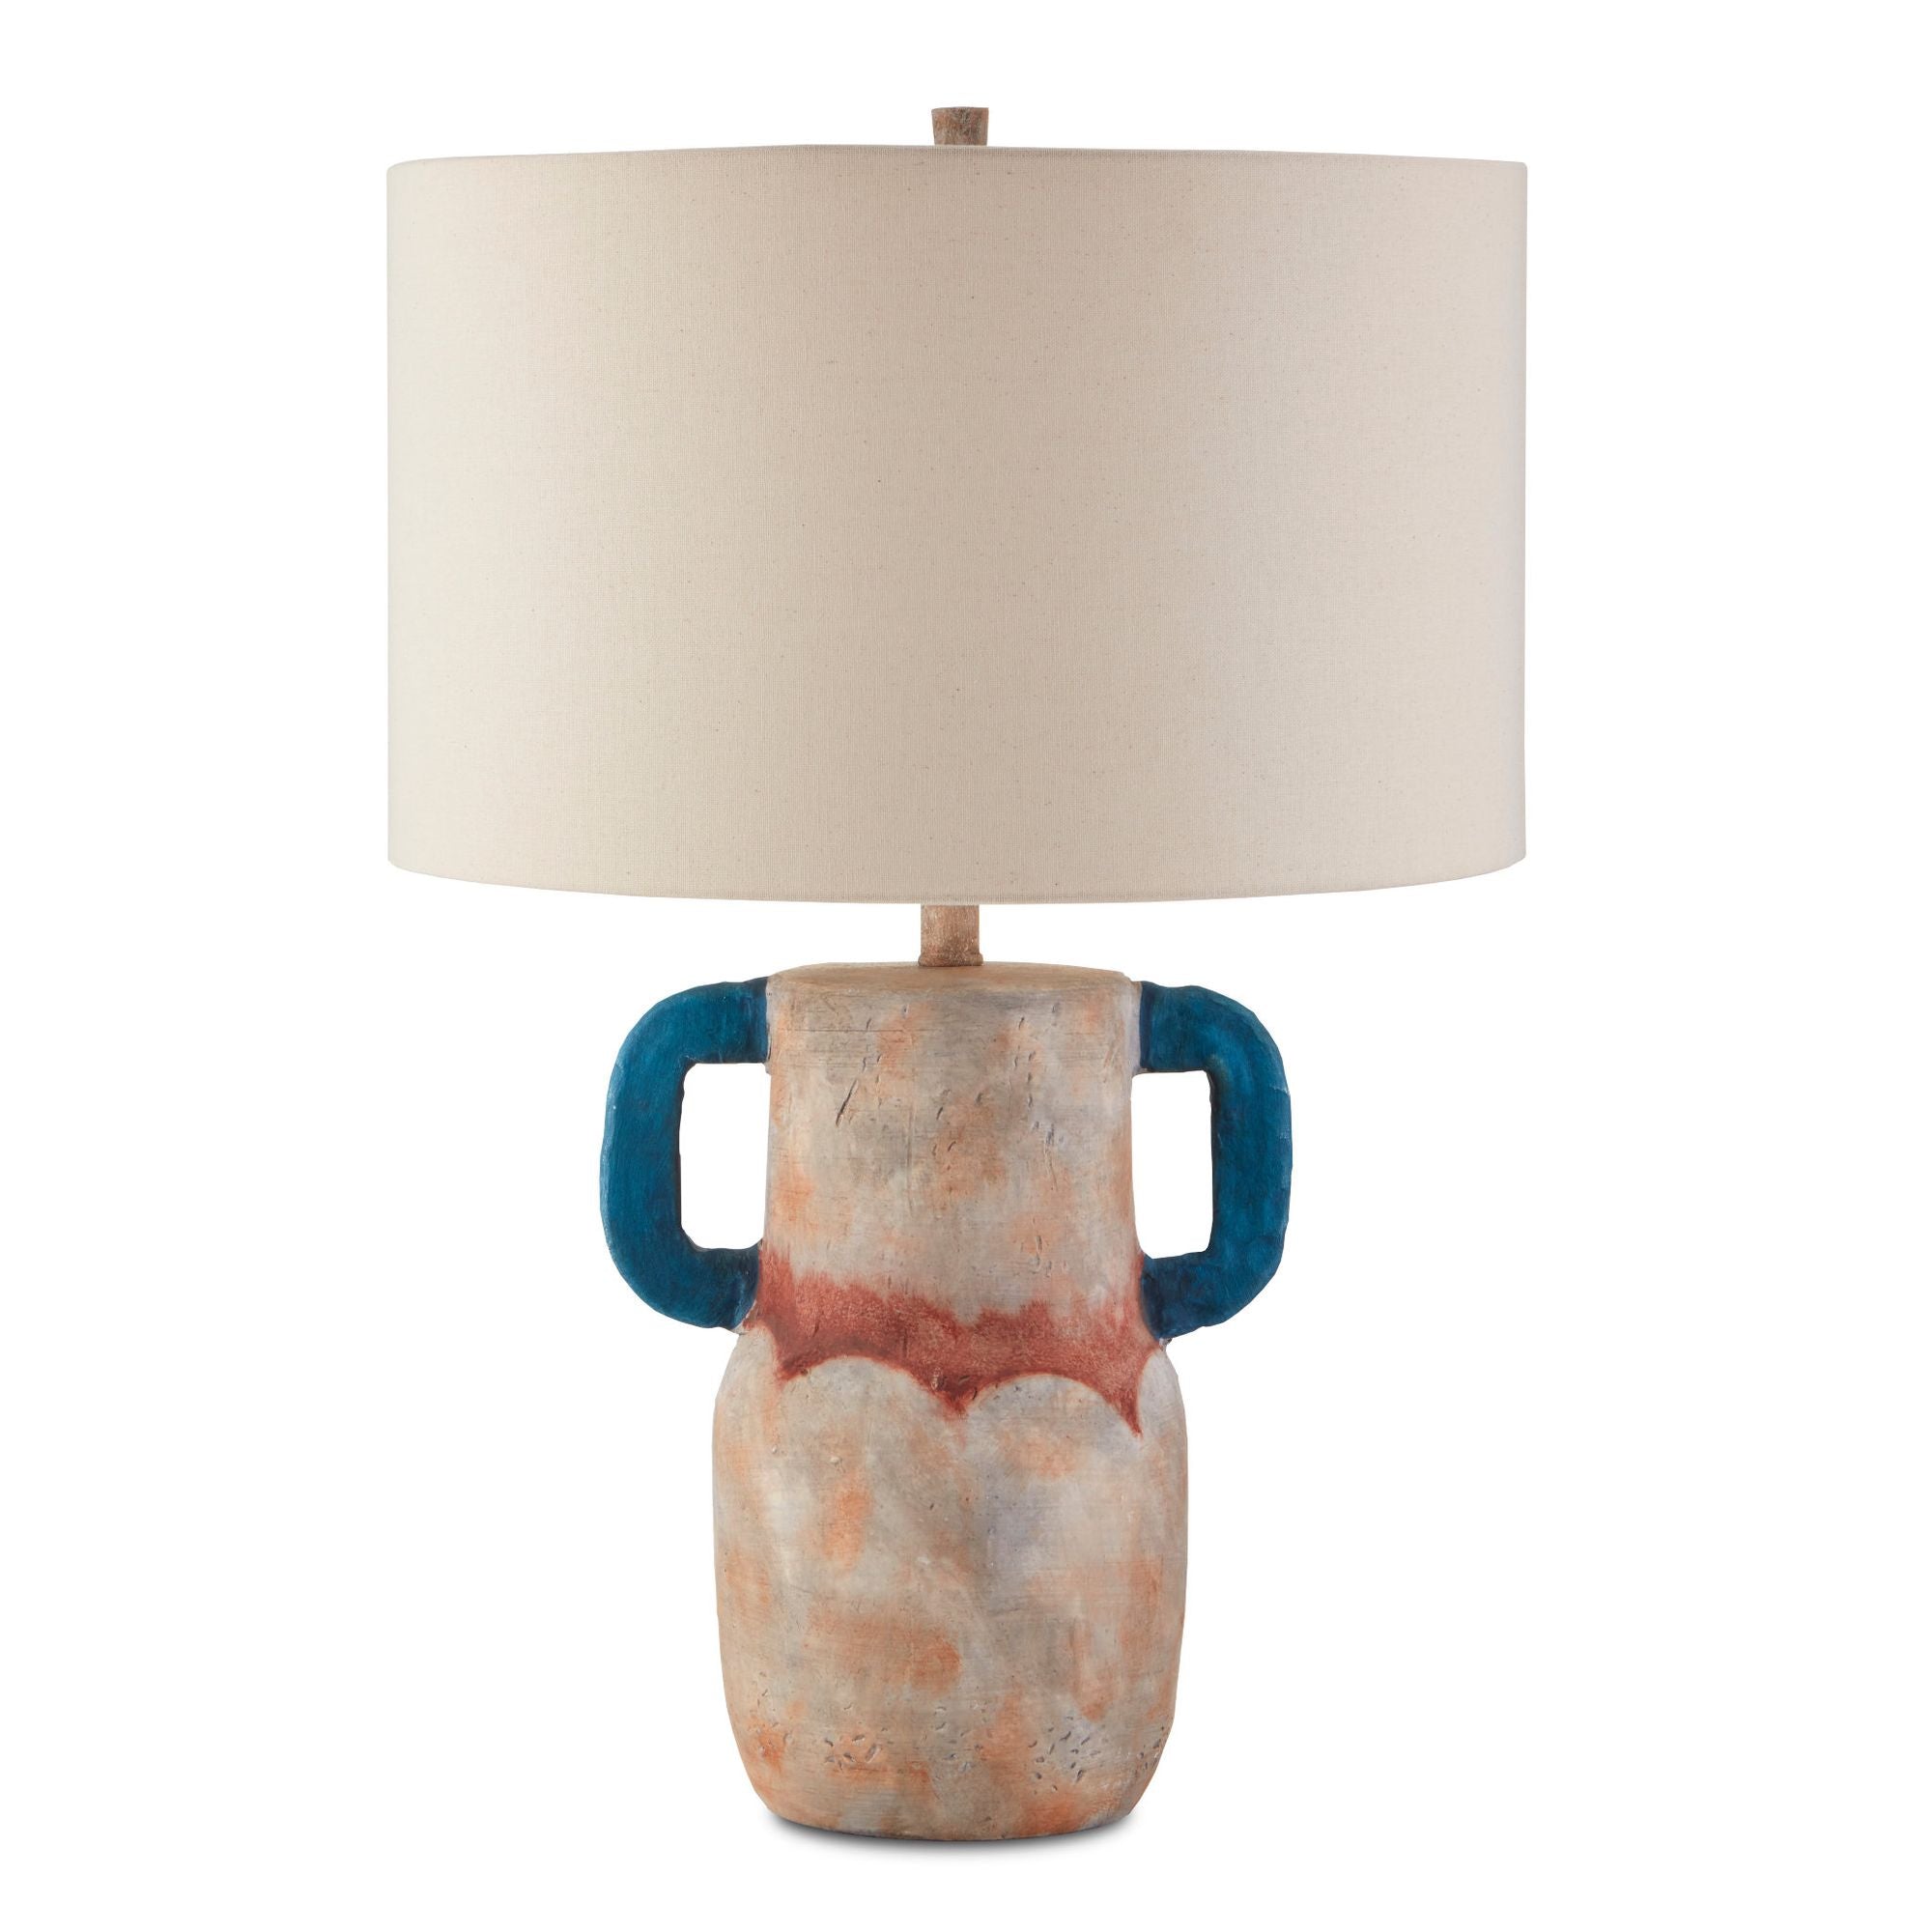 Arcadia Table Lamp - Sand/Teal/Red